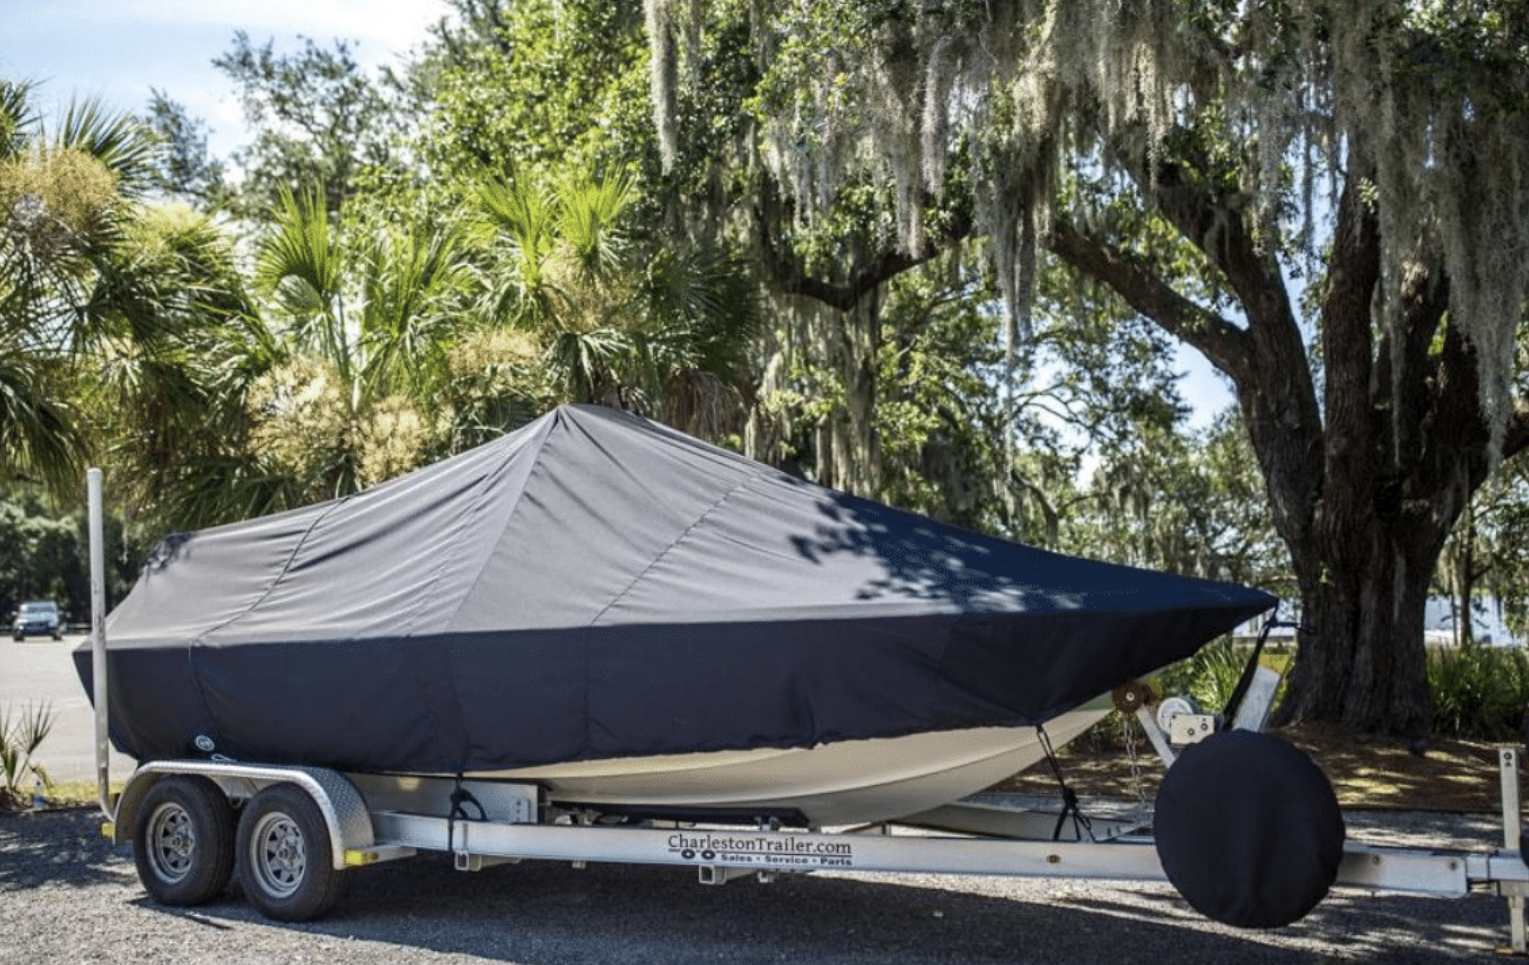 Choosing the Best Cover for Your Boat, Part 1